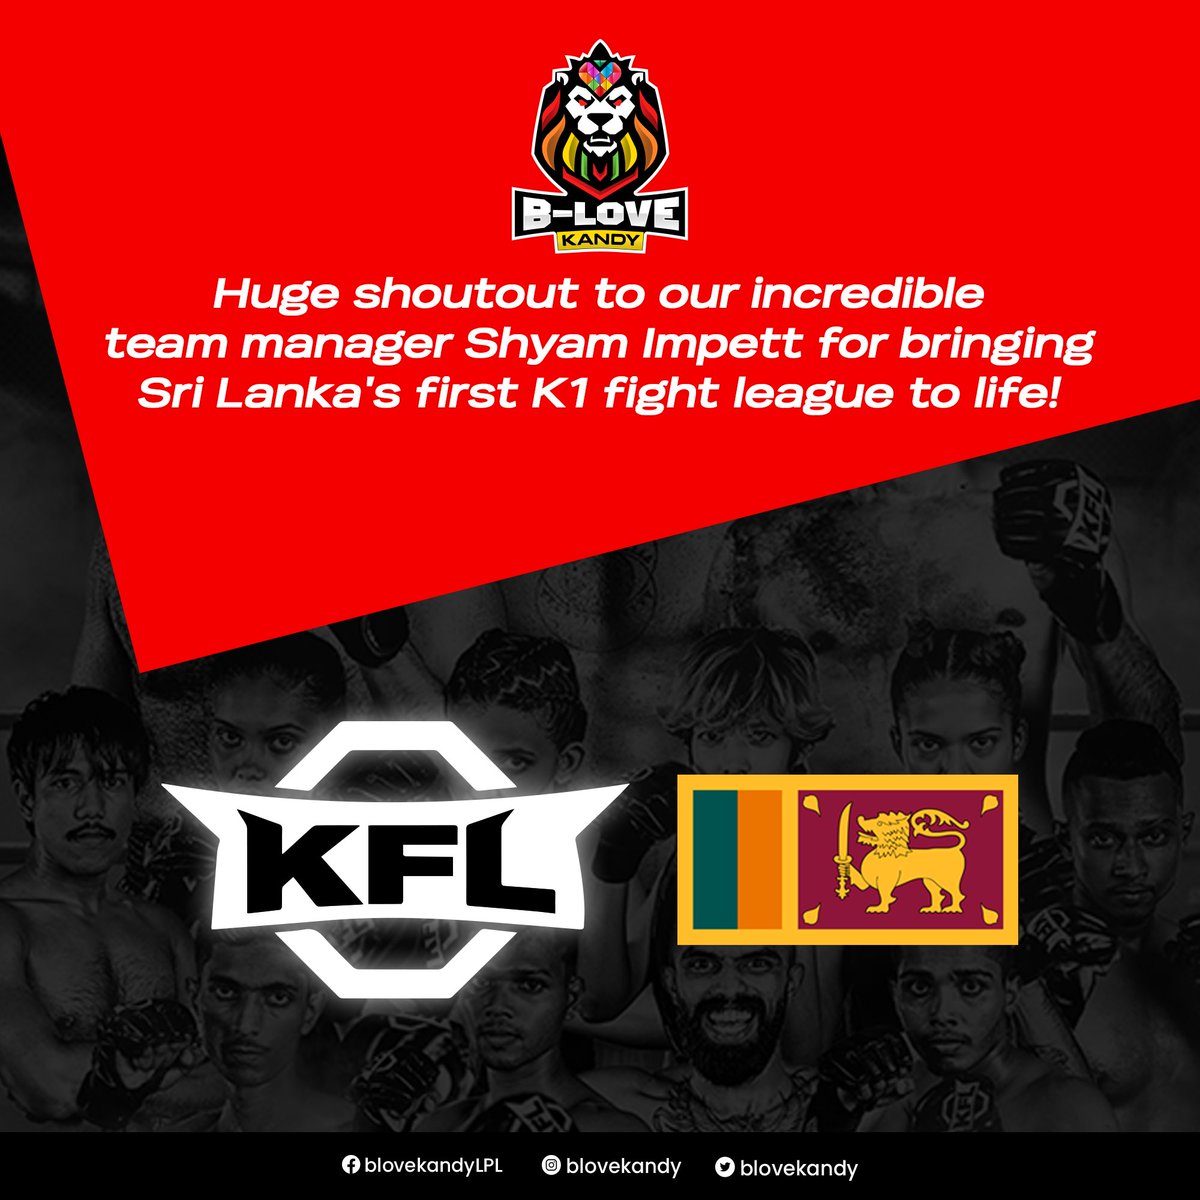 Sri Lanka's first K1 fight league is HERE! Get ready for an explosive new era of combat sports. Huge congrats to our team manager Shyam Impett for making history! #KFL #K1SriLanka #MakingHistory #K1Hype